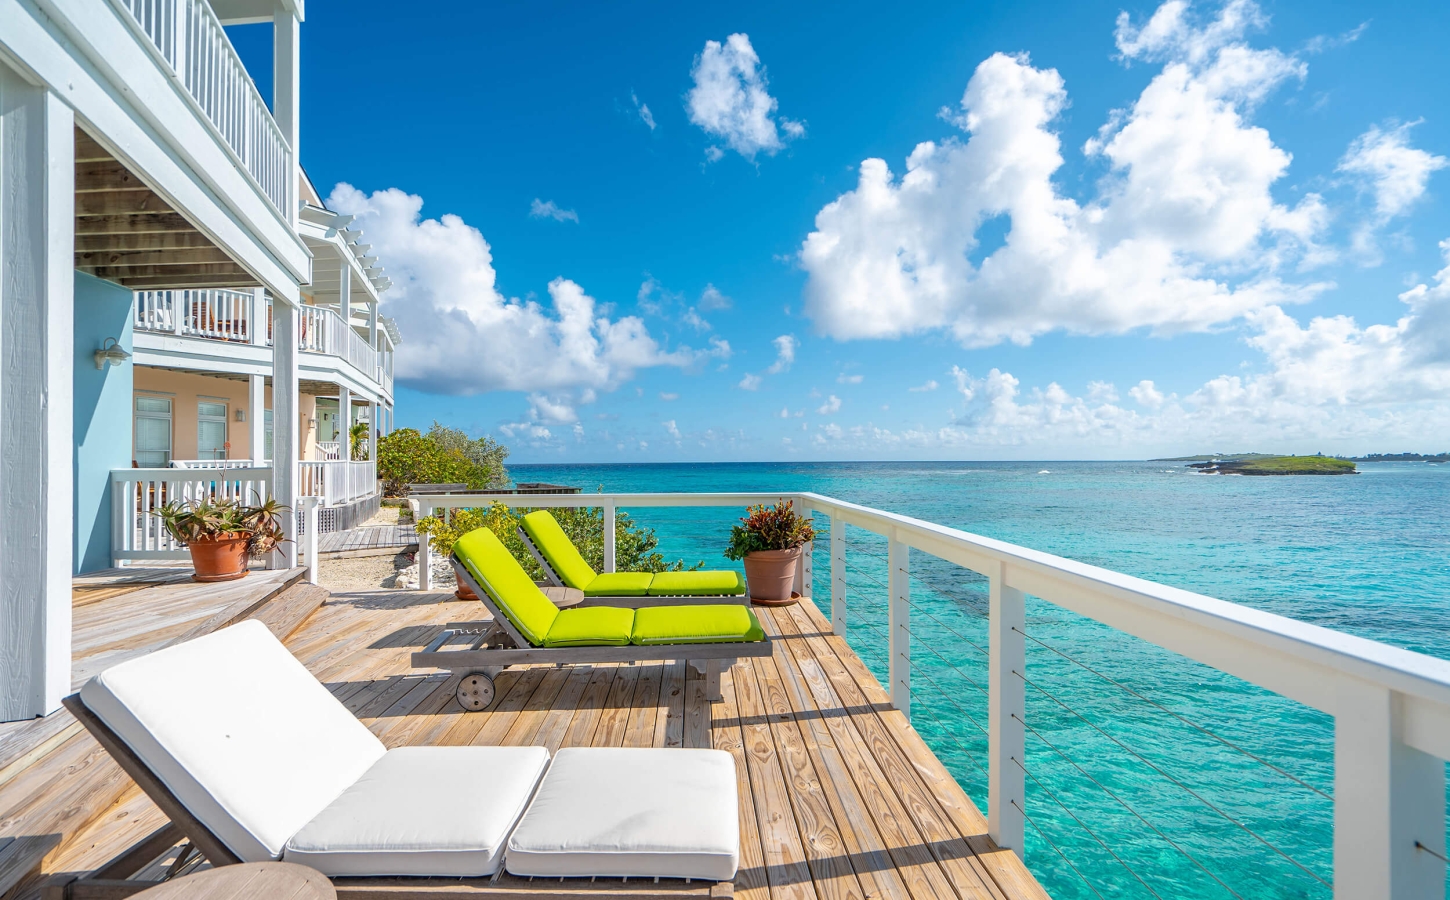 Balcony of a luxury beachfront property at The Abaco Club